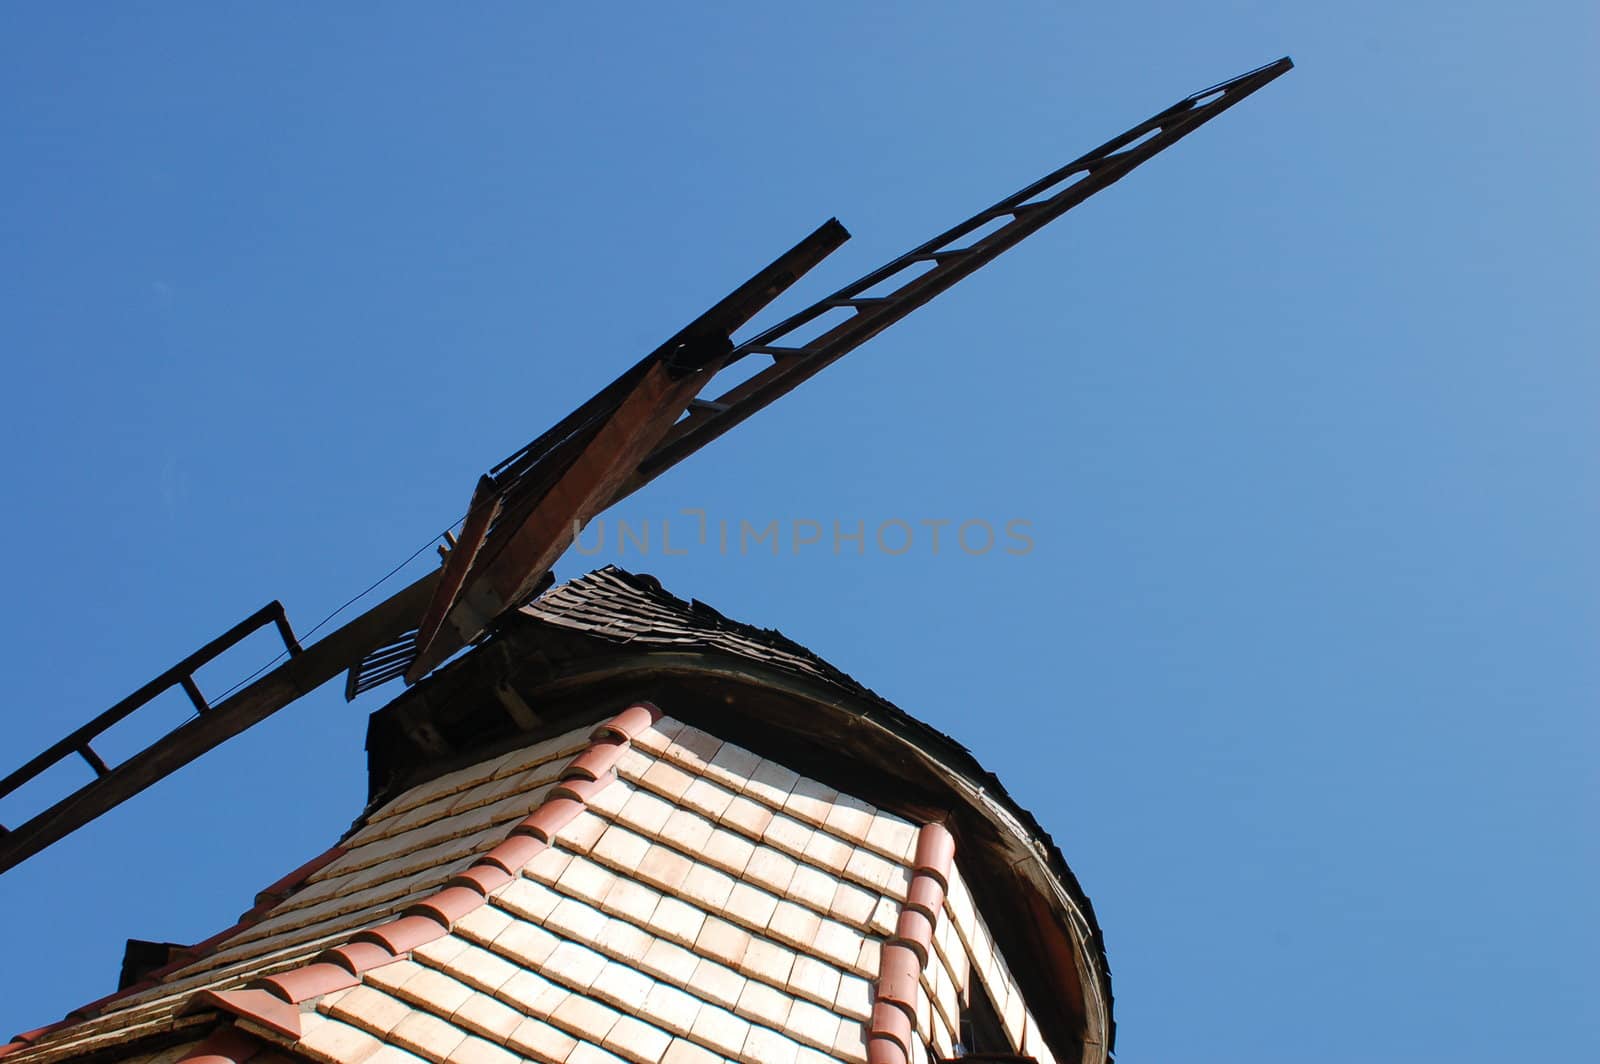 View of the blades of a windmill at The lake Shrine in California, against a bright blue sky.